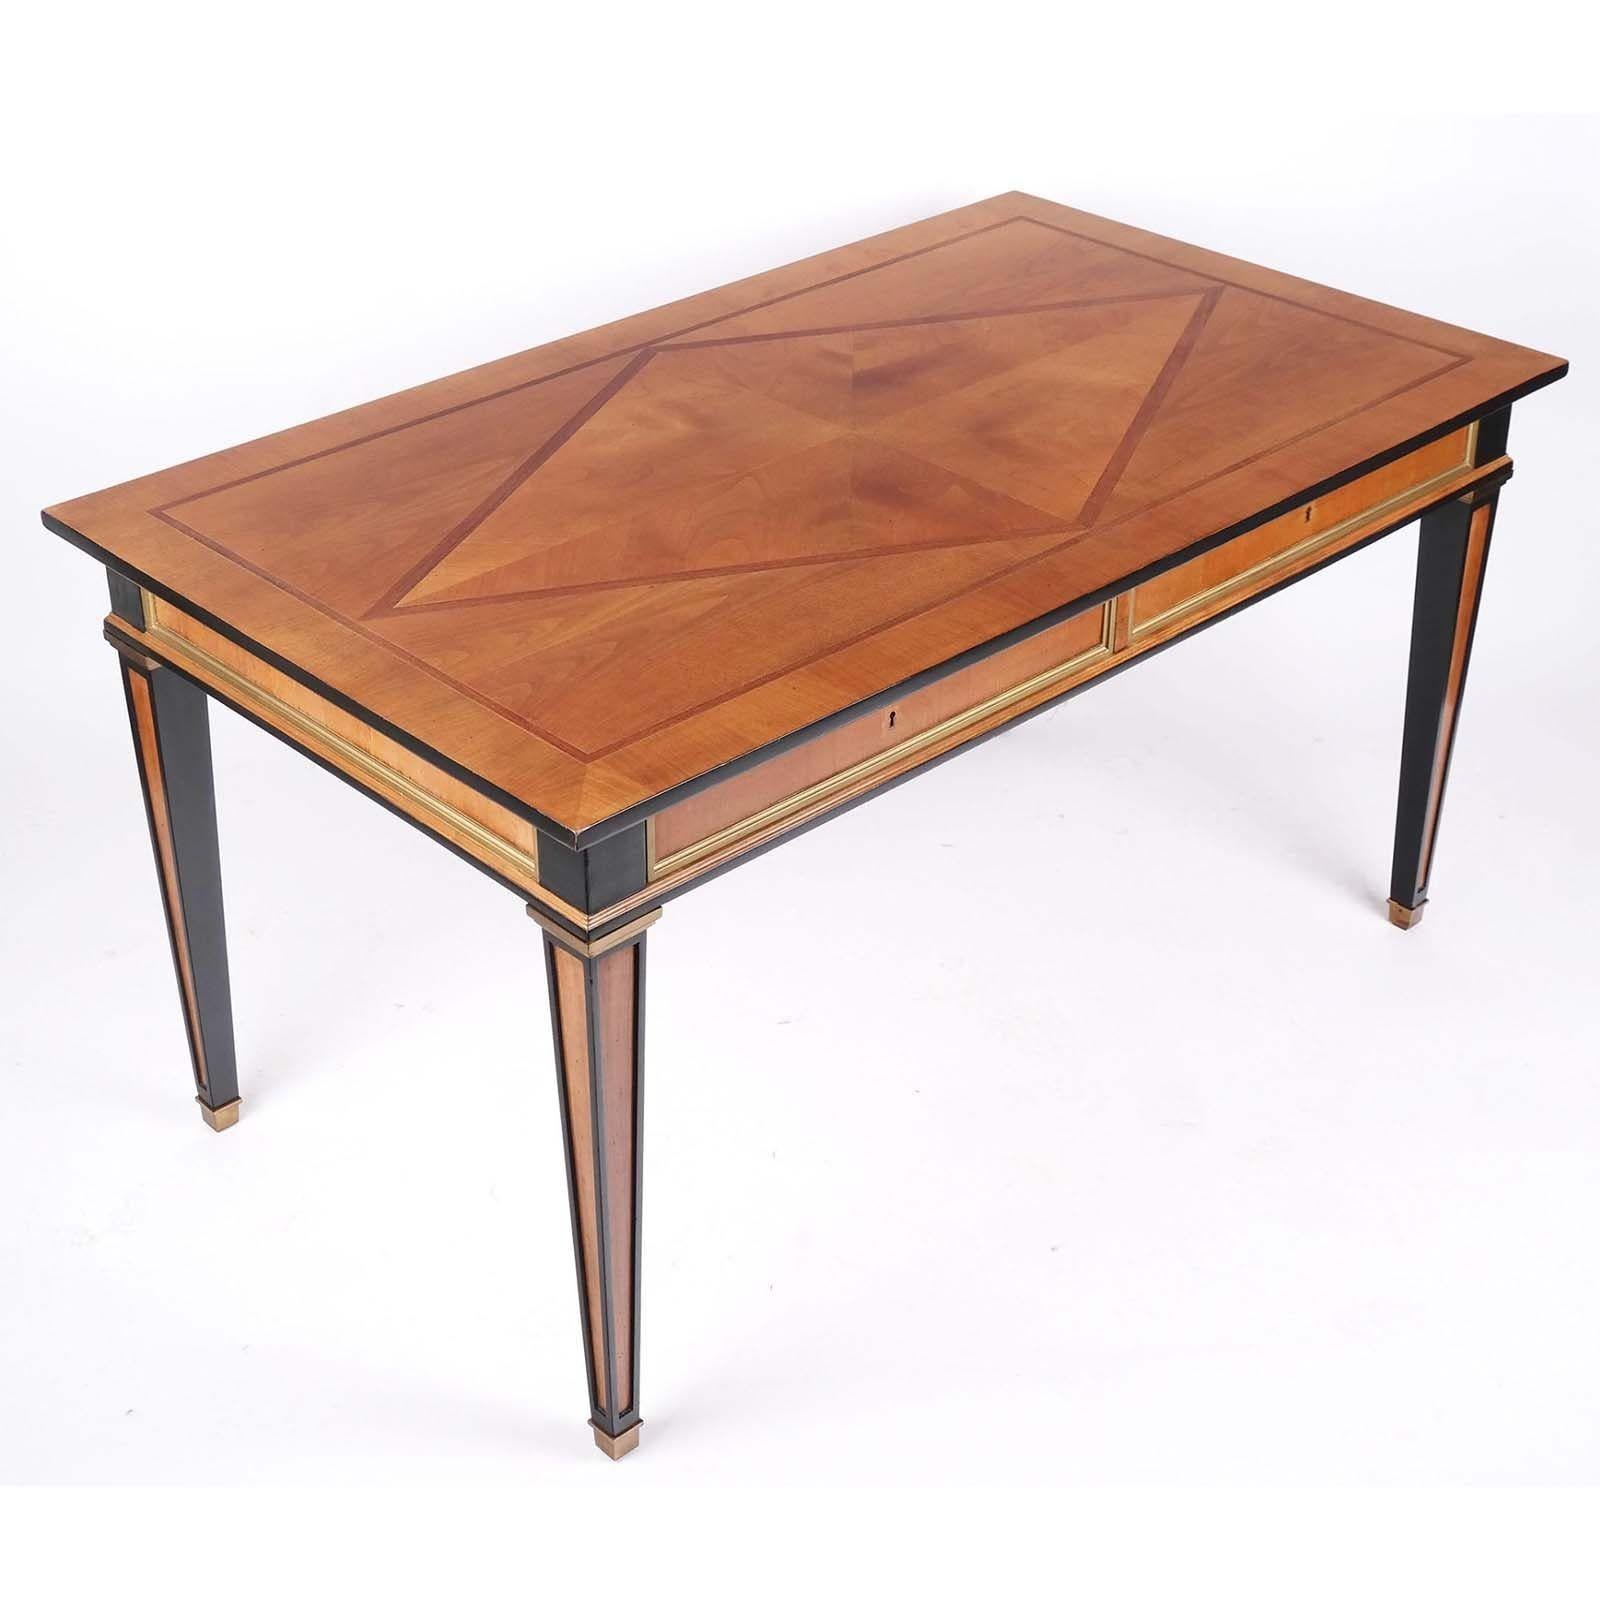 French Neoclassical Empire-Style parcel ebonized desk with maple and mahogany parquetry top.